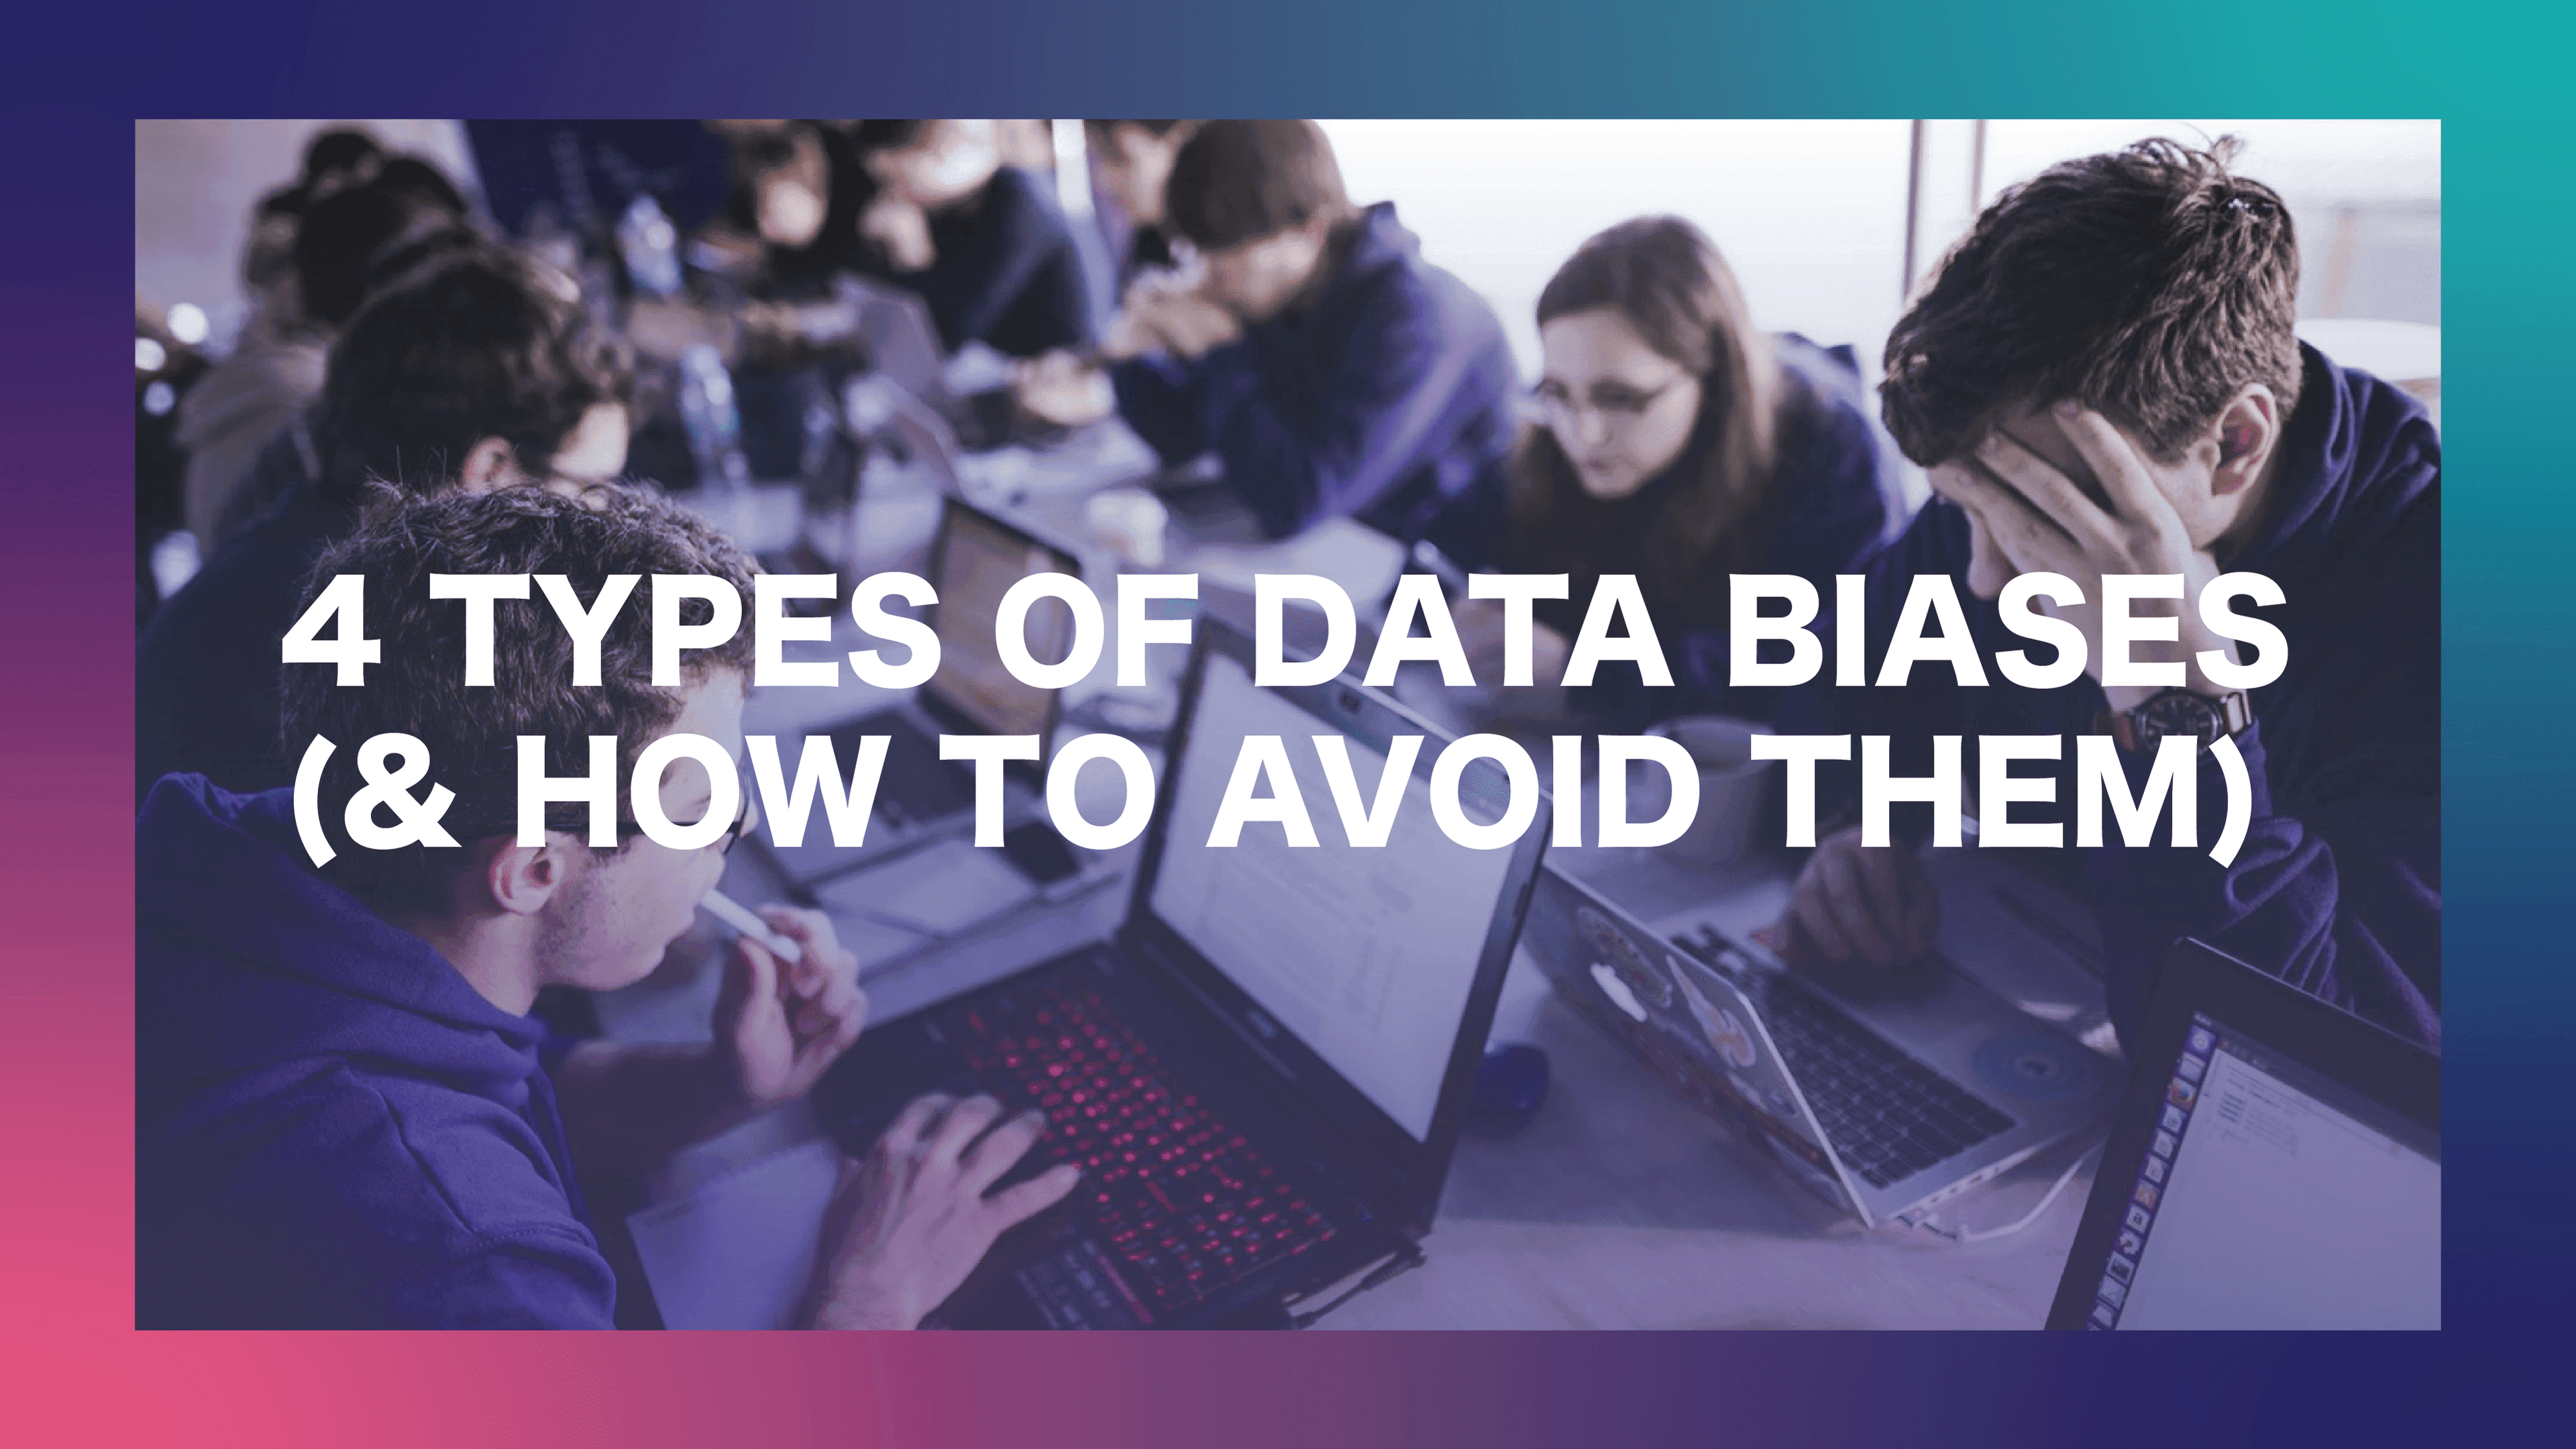 4 Types of Data Biases (& How to Avoid Them)